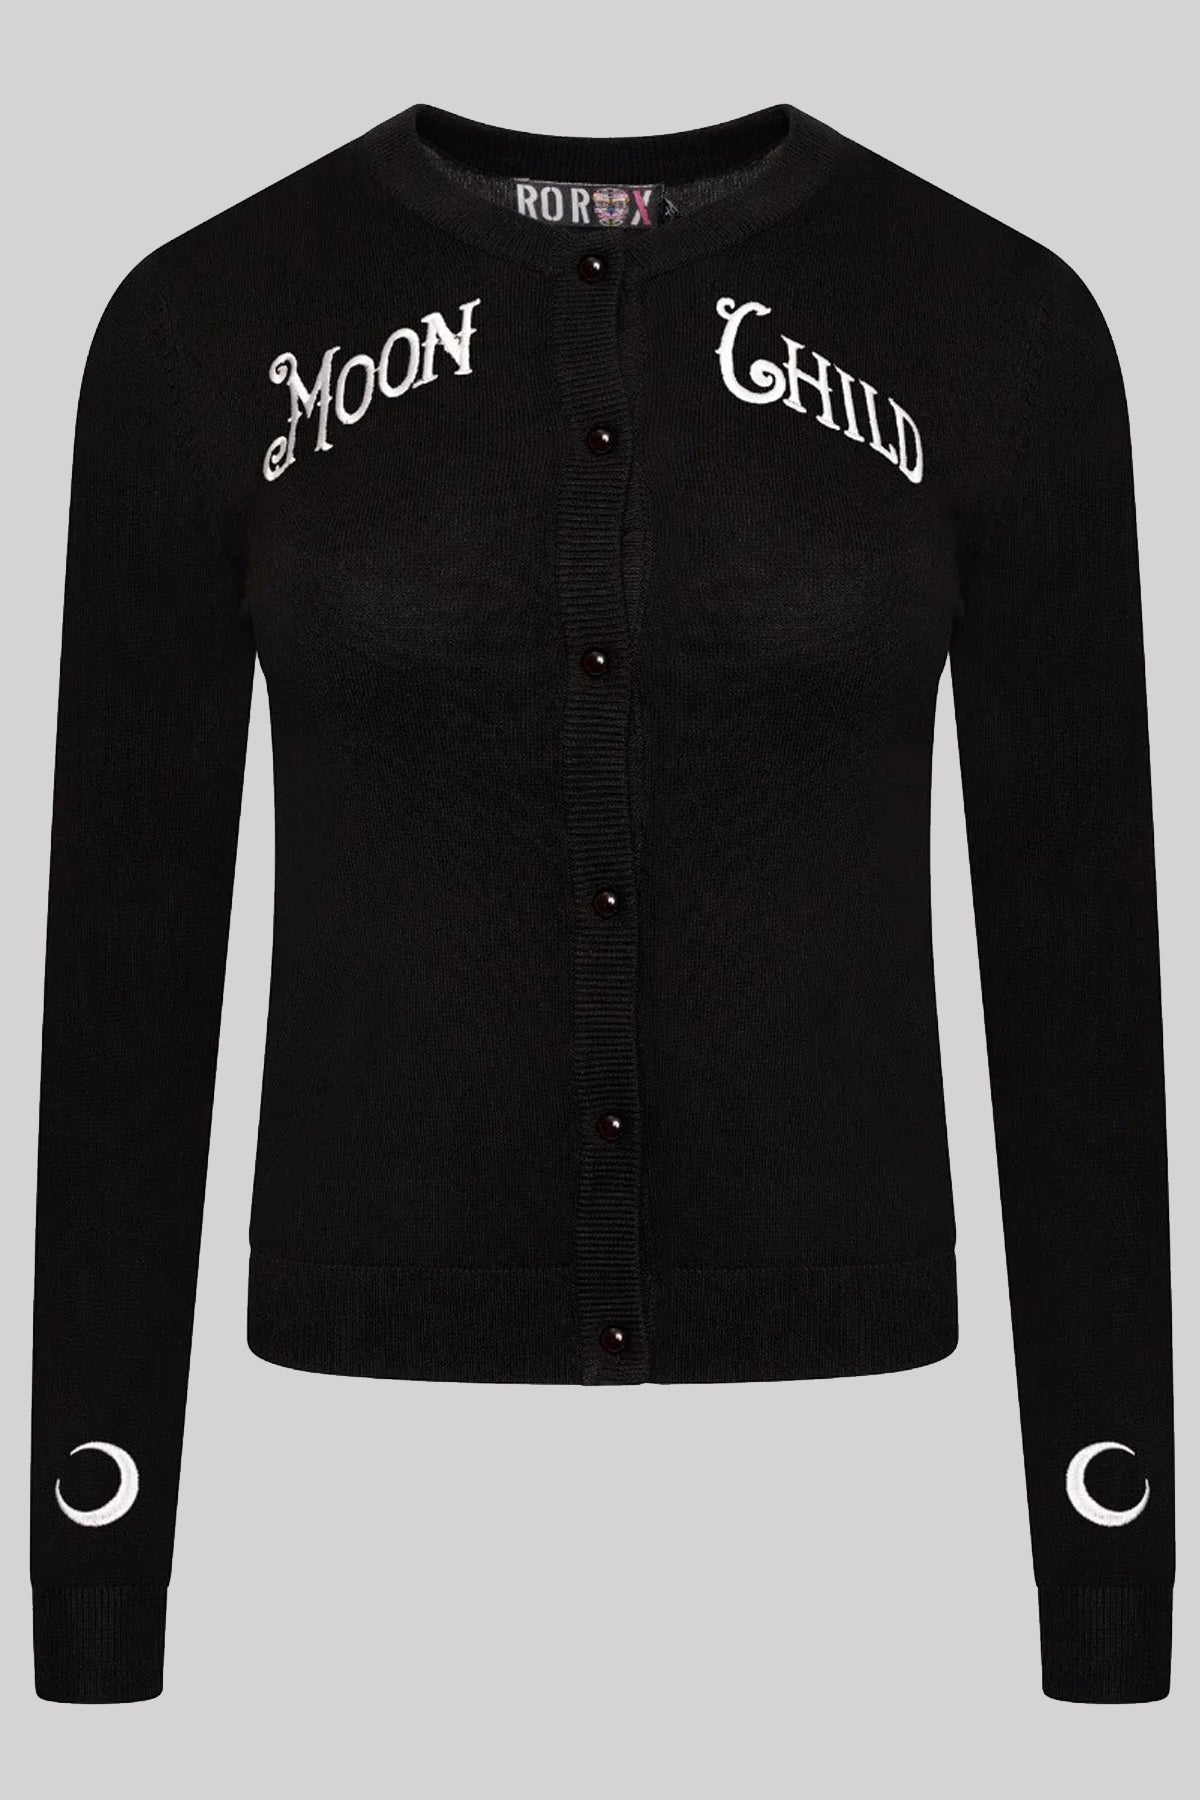 Ro Rox Moon Child Embroidery Rockabilly Knitted Long Sleeve Cardigan